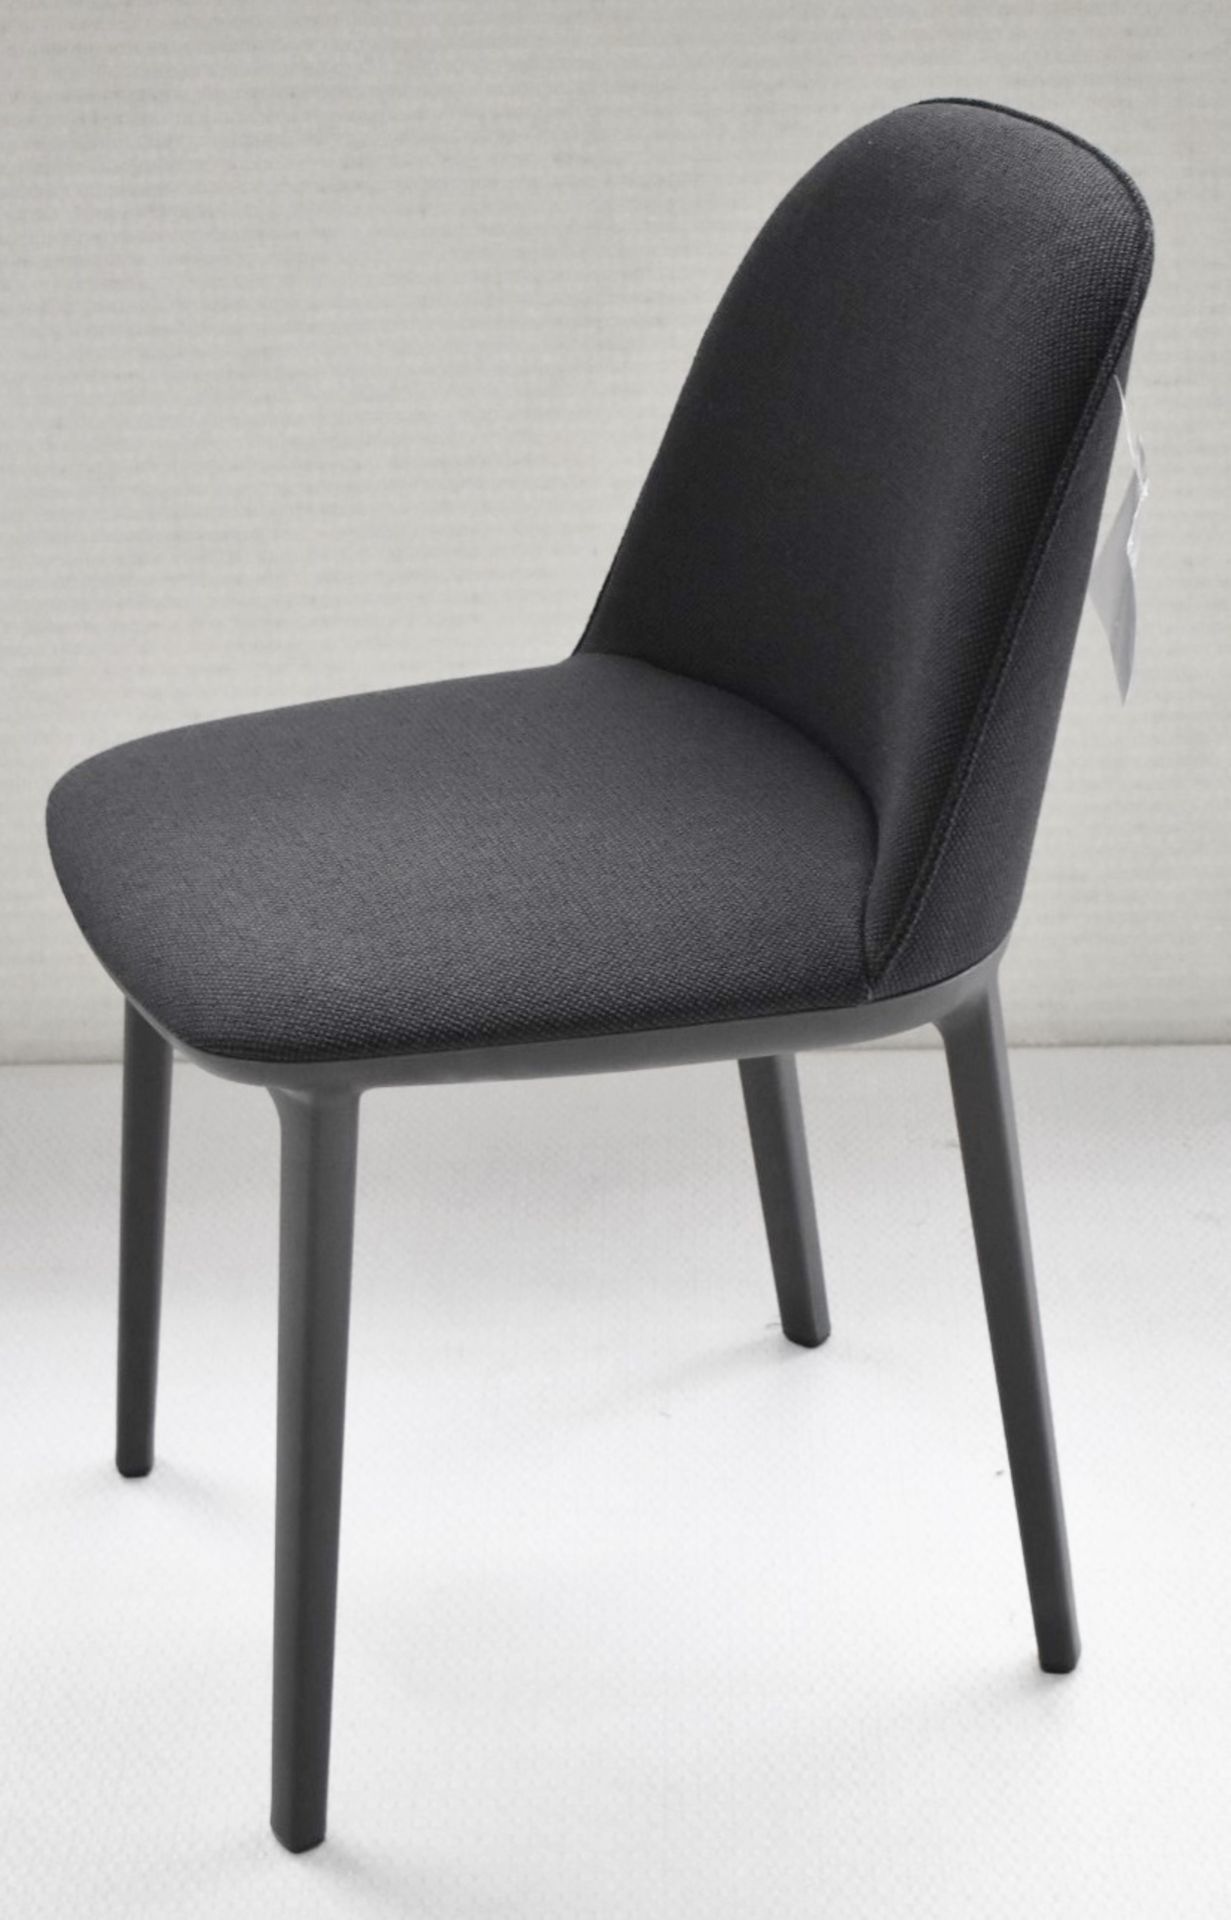 1 x VITRA Softshell Designer Chair With Padded Seat, In Anthracite Black / Grey - Original RRP £805 - Image 5 of 5